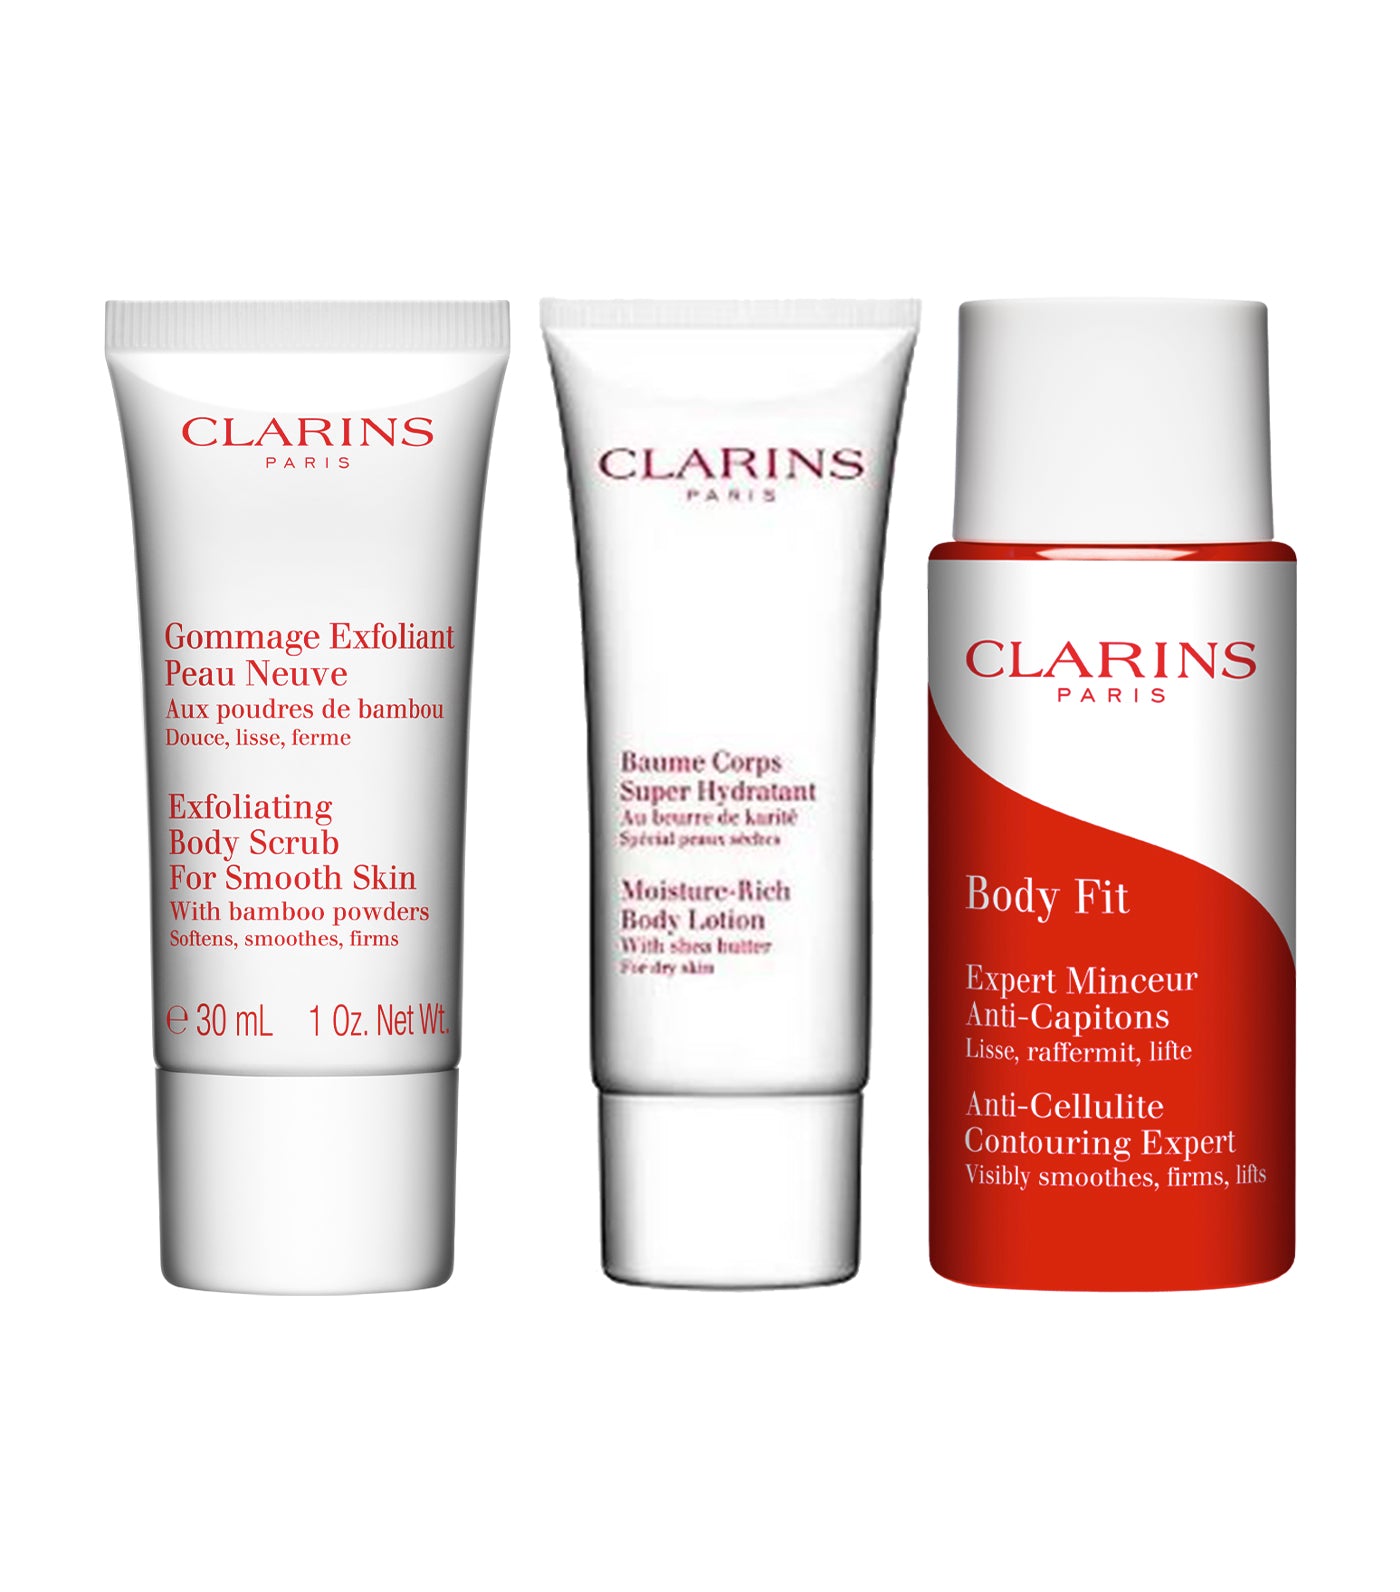 CLARINS Body Fit Anti-Cellulite Contouring Expert